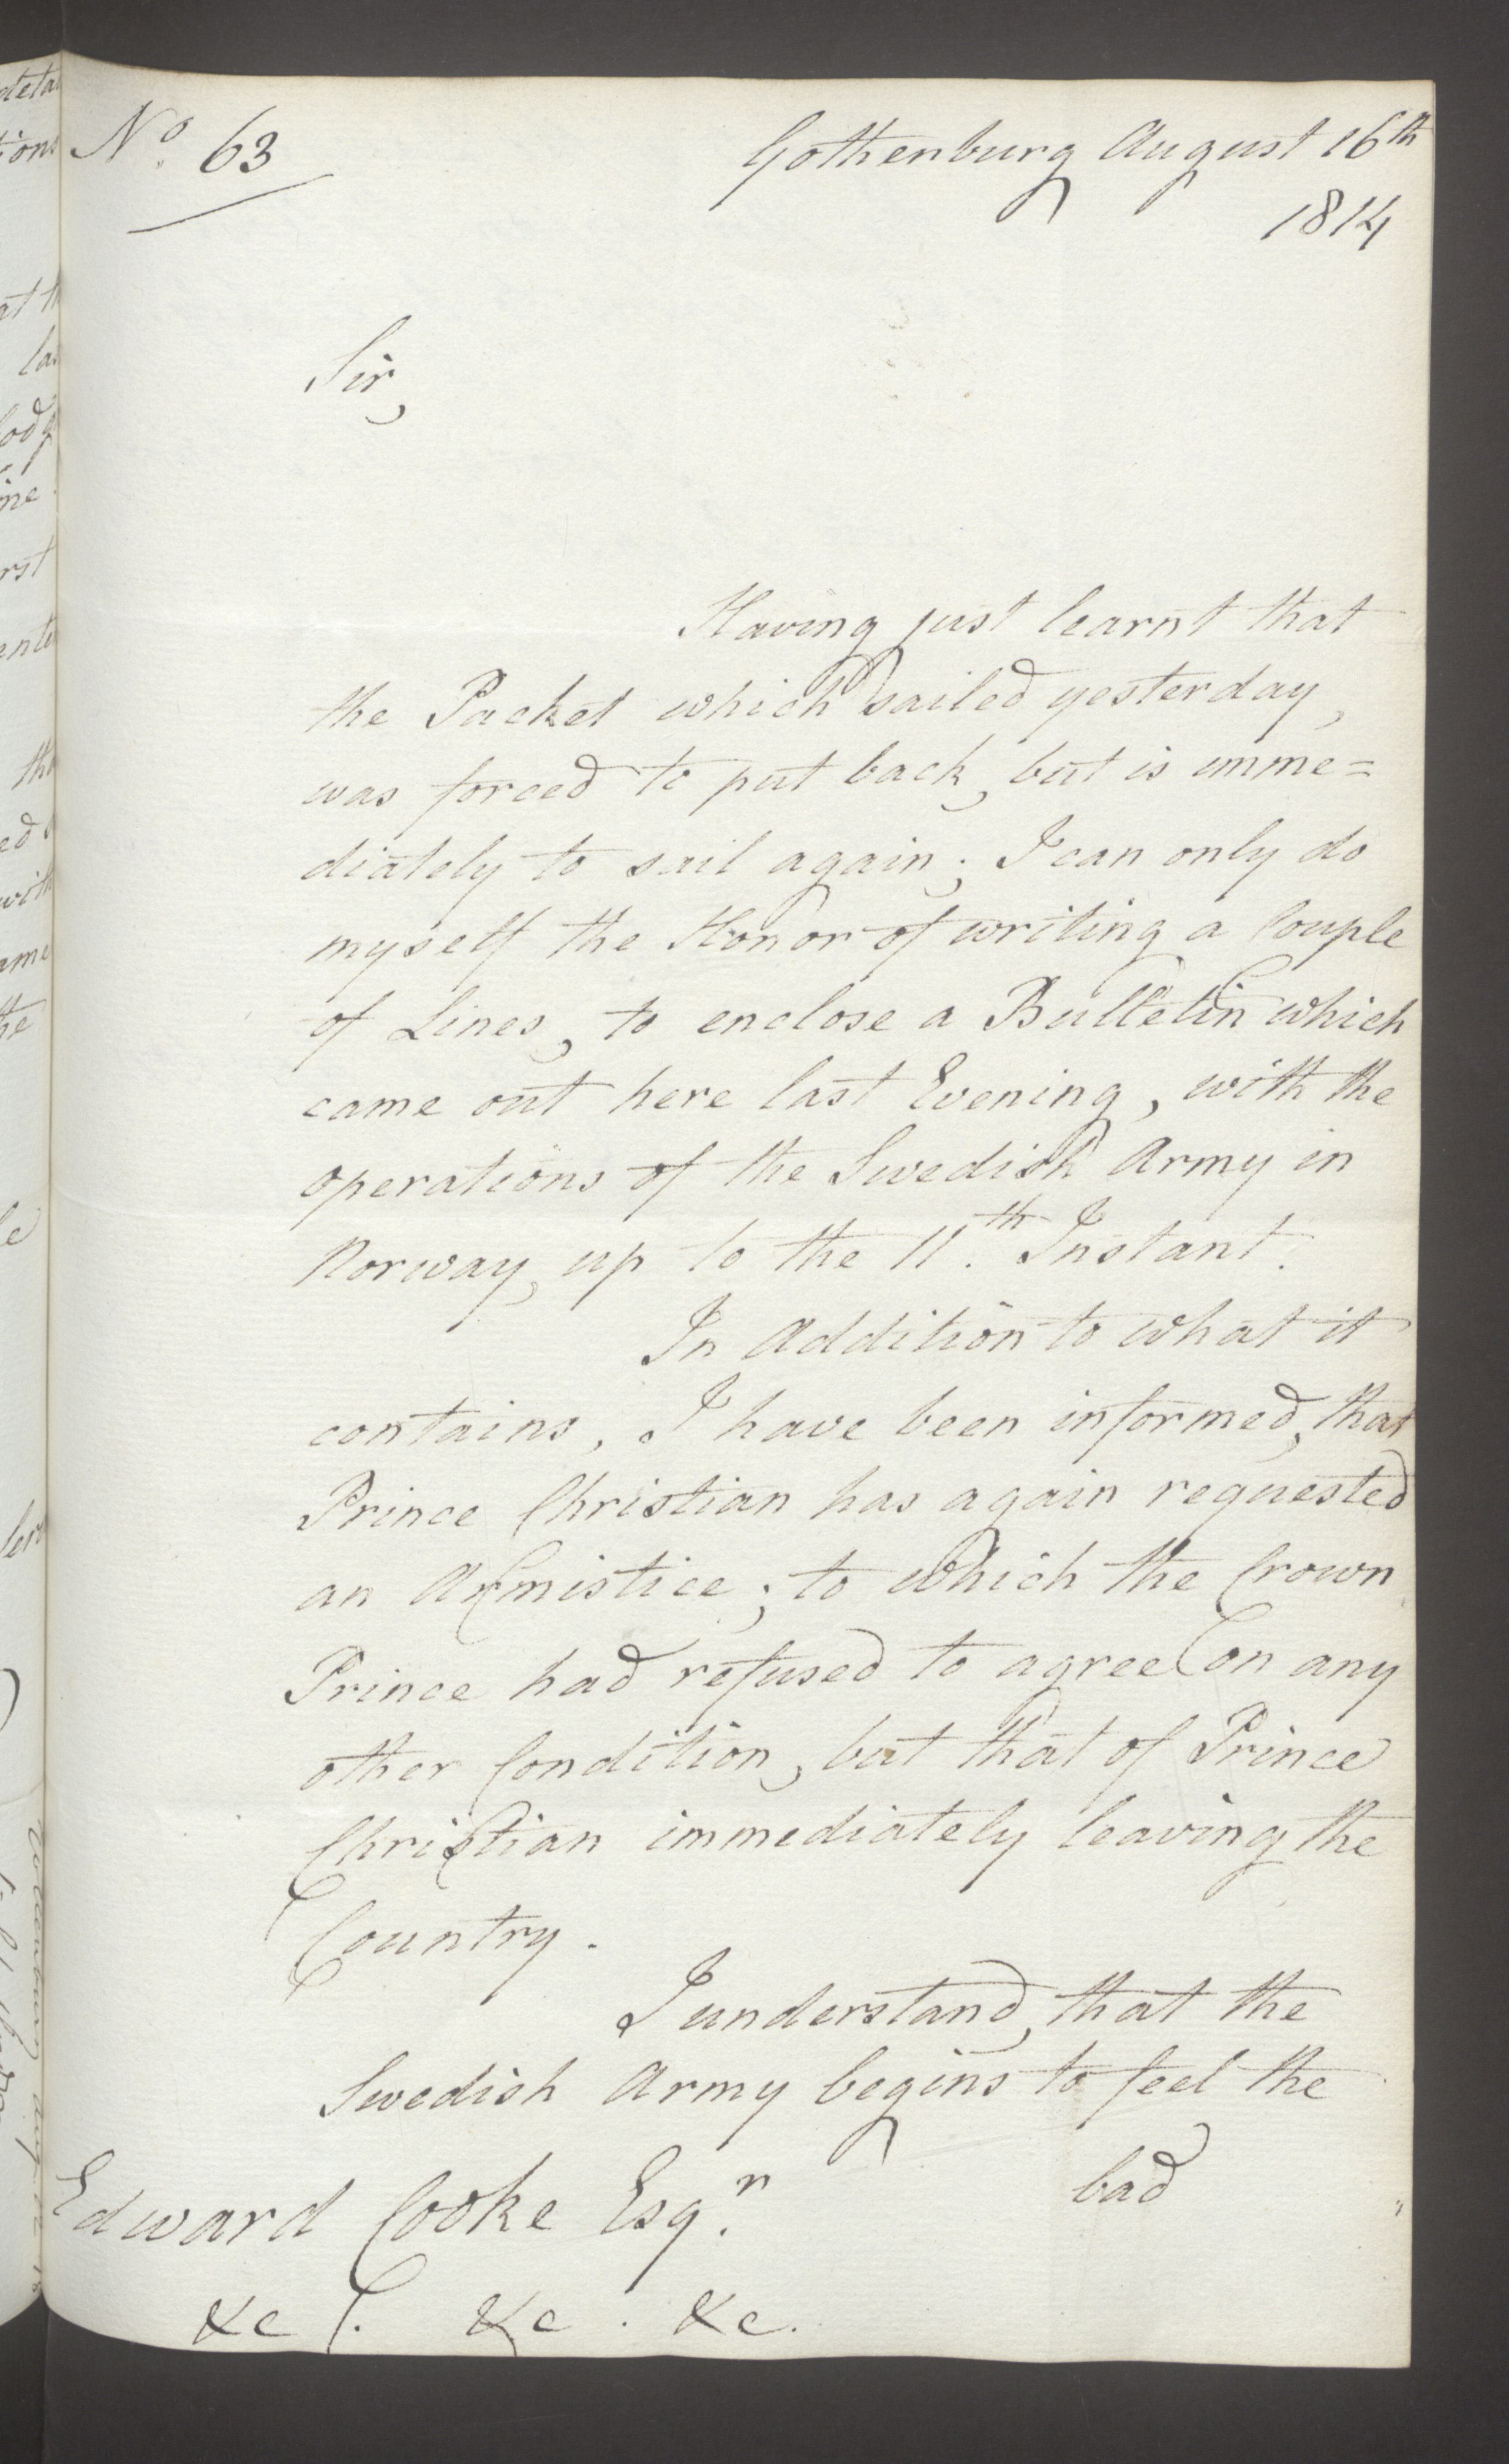 Foreign Office*, UKA/-/FO 38/16: Sir C. Gordon. Reports from Malmö, Jonkoping, and Helsingborg, 1814, s. 83